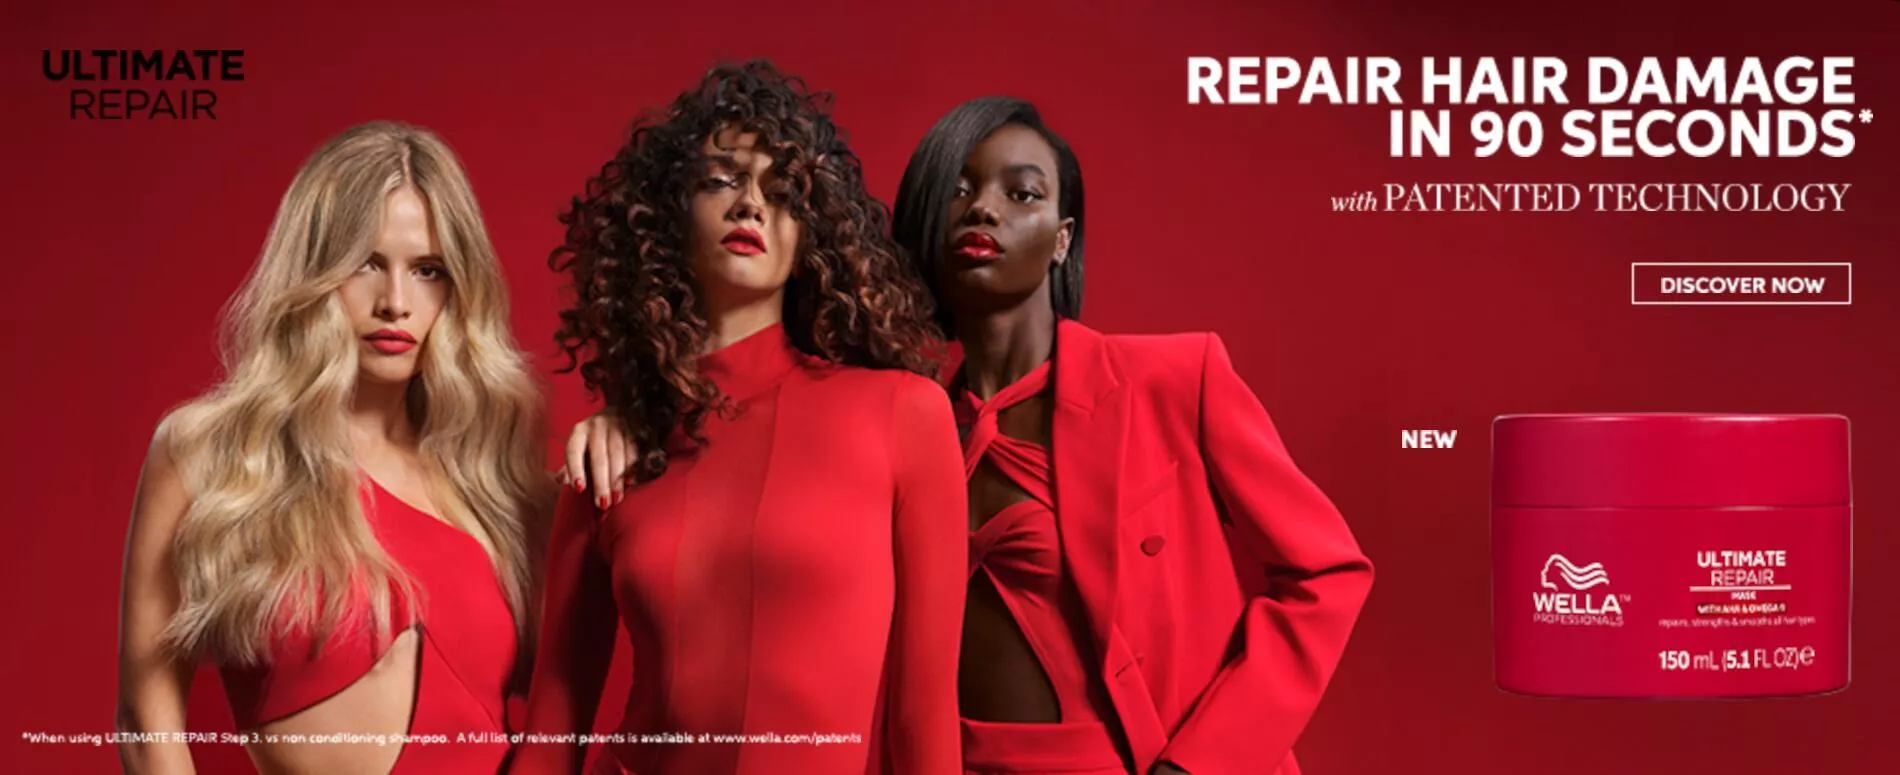 Image of 3 models wearing red beside the a red bottle of Ultimate Repair Mask for damaged hair by Wella Professionals